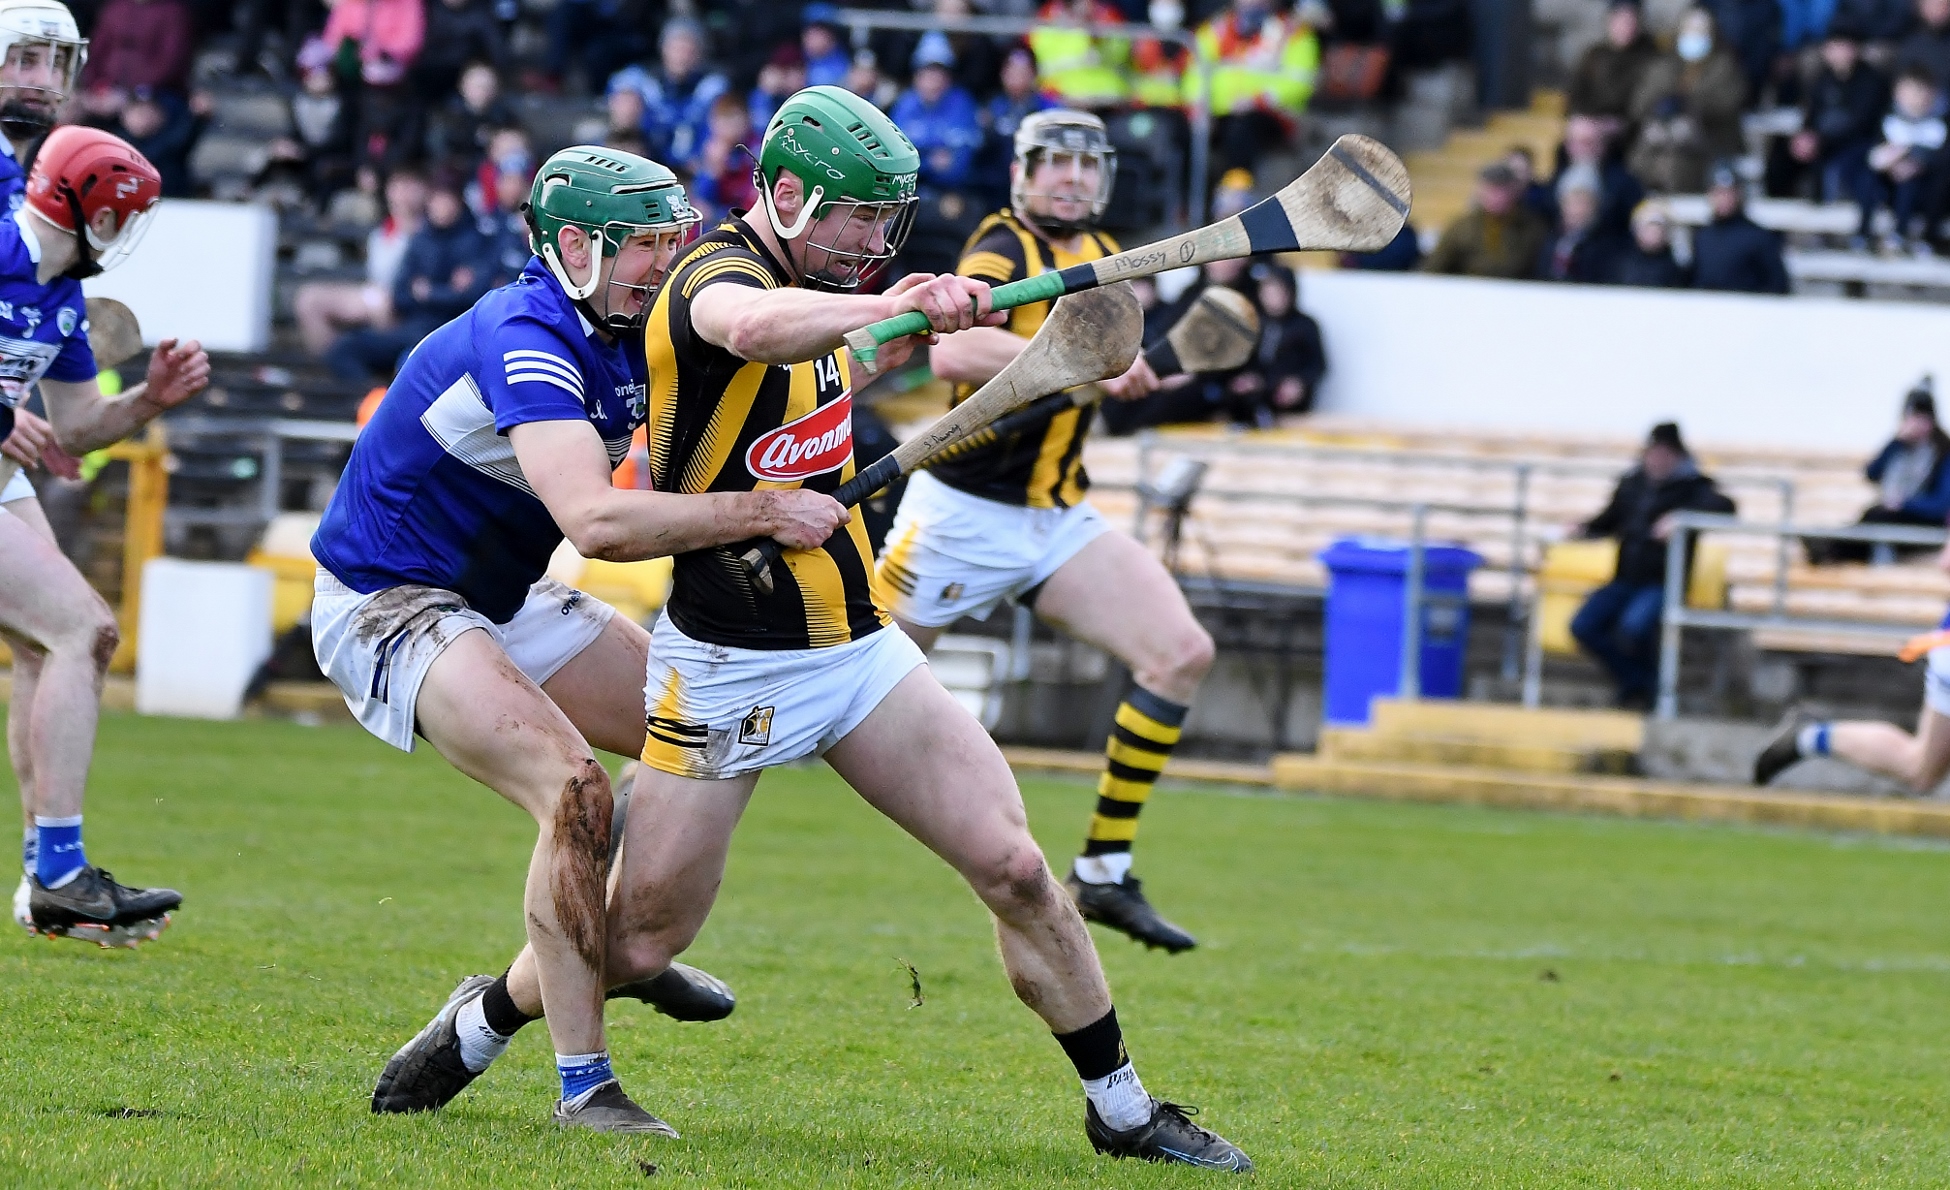 Kilkenny claim all two points on offer in Laois game